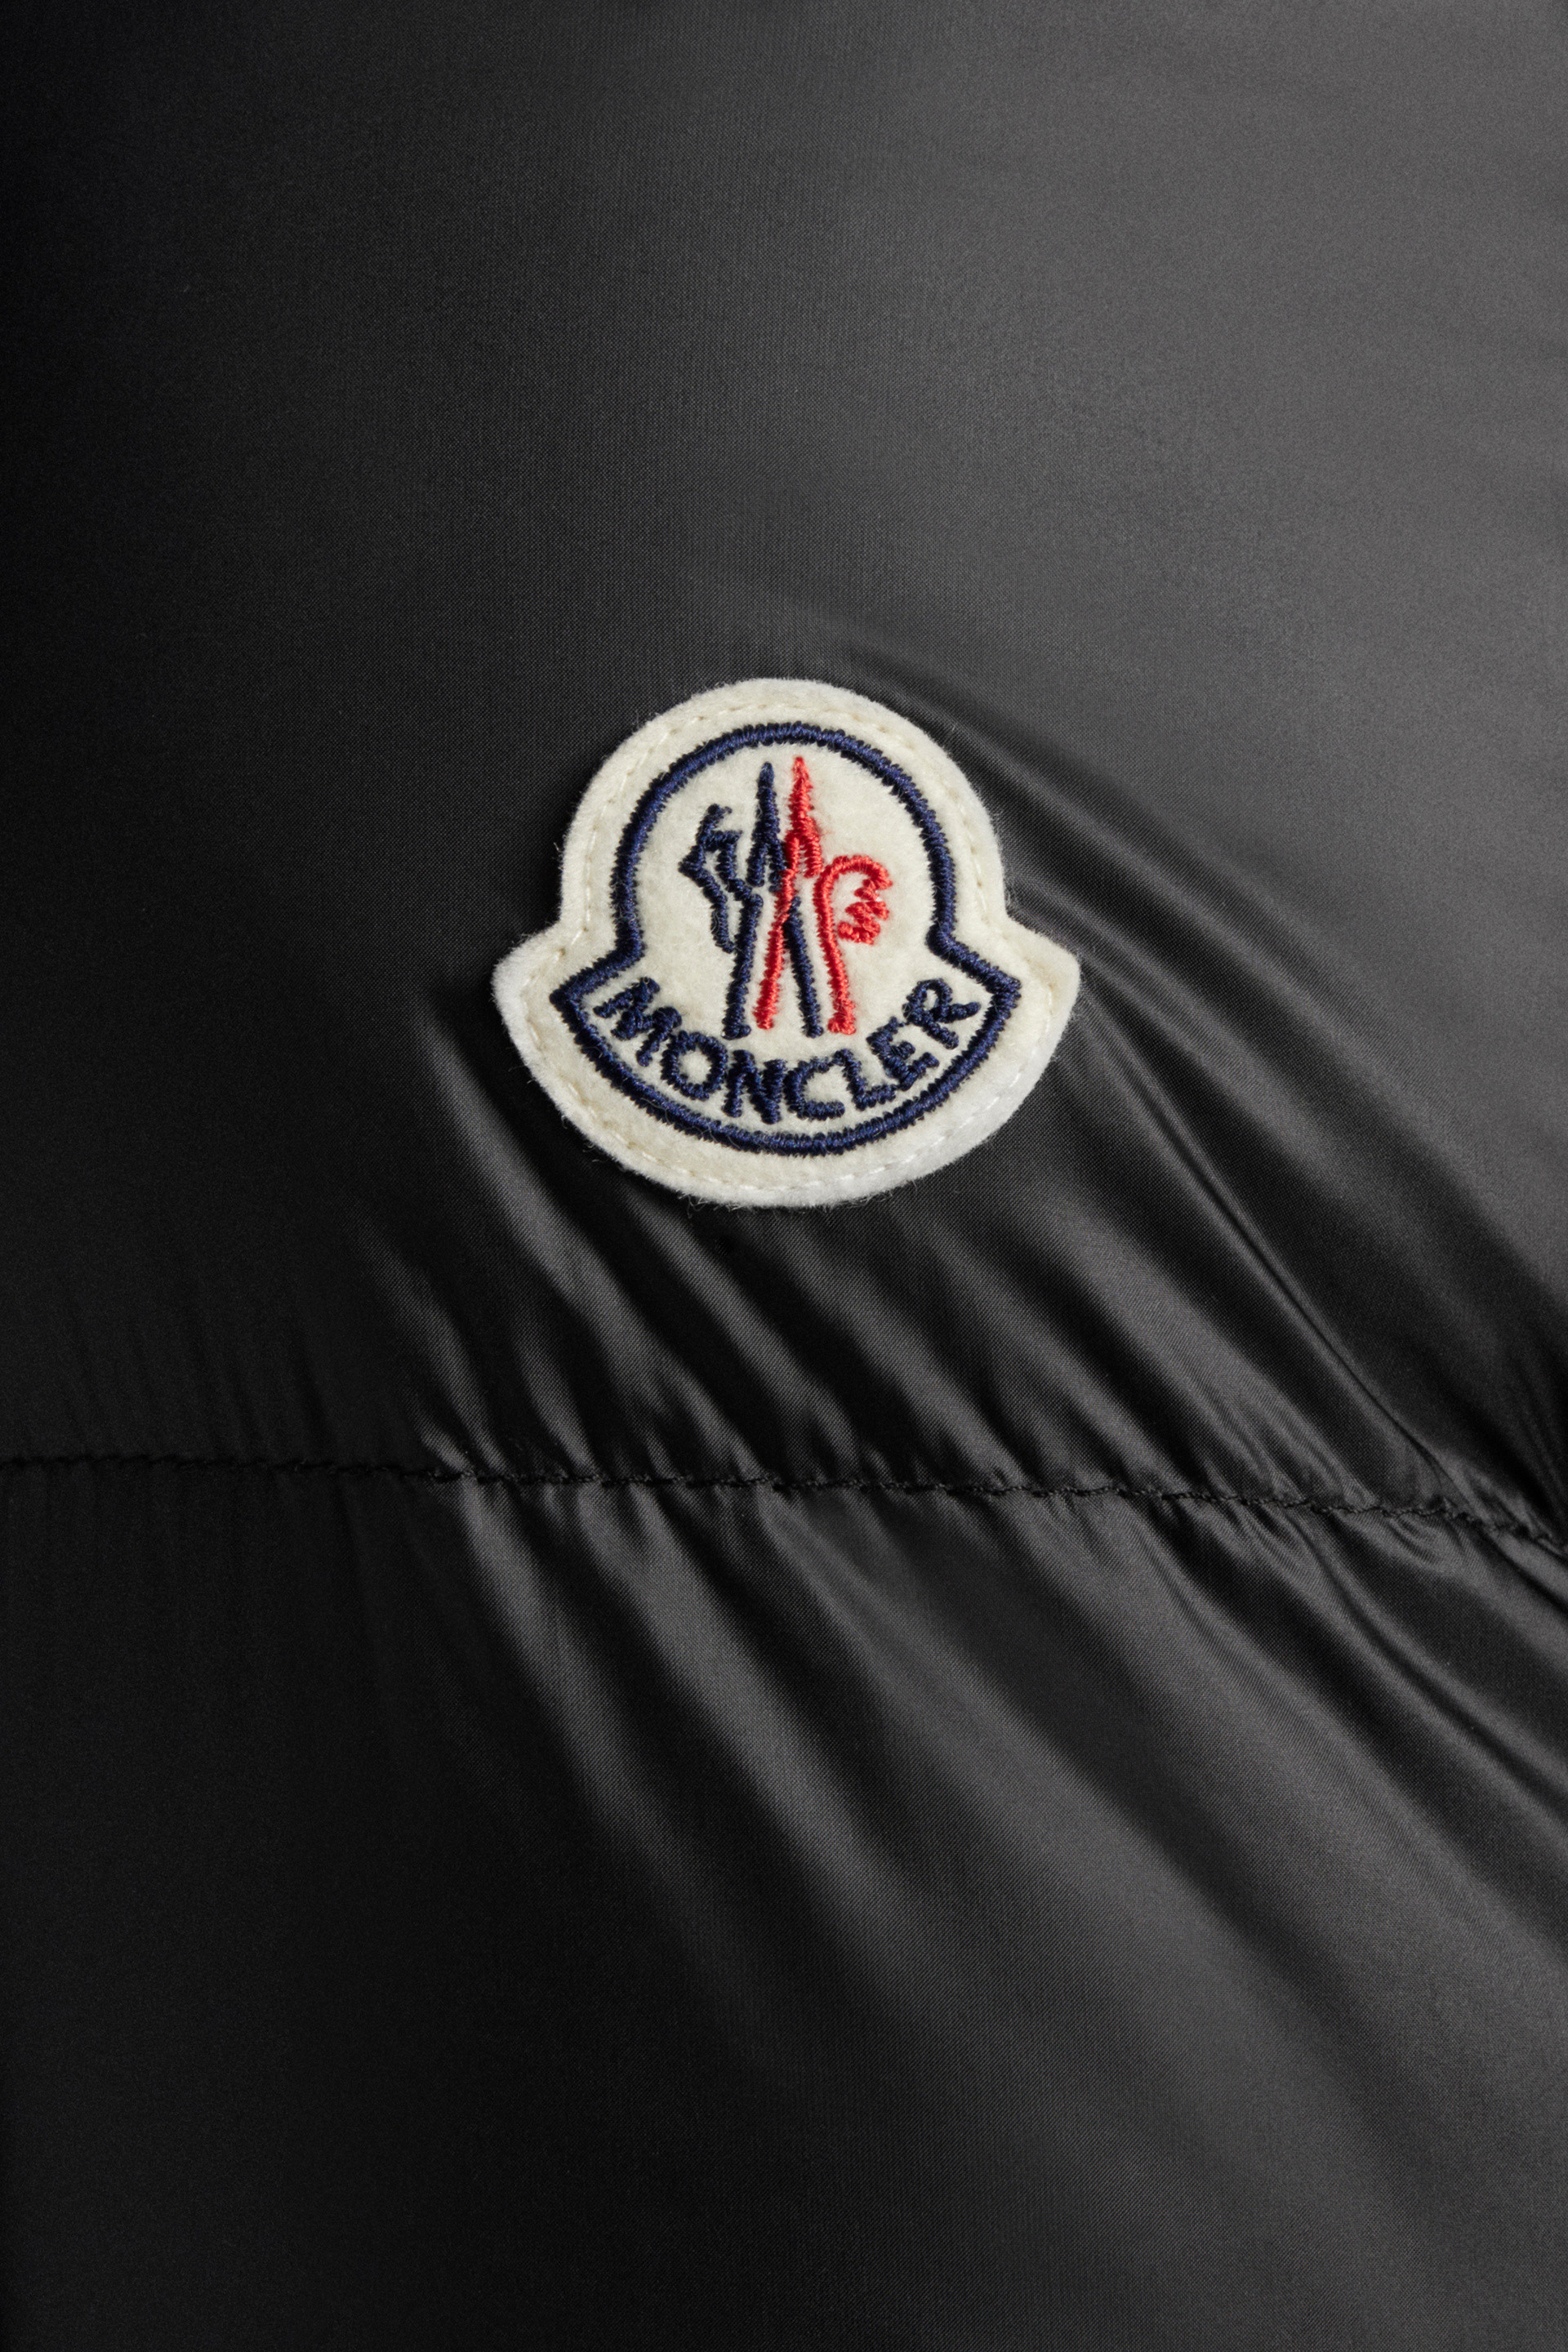 moncler symbol,OFF 74%,www.concordehotels.com.tr